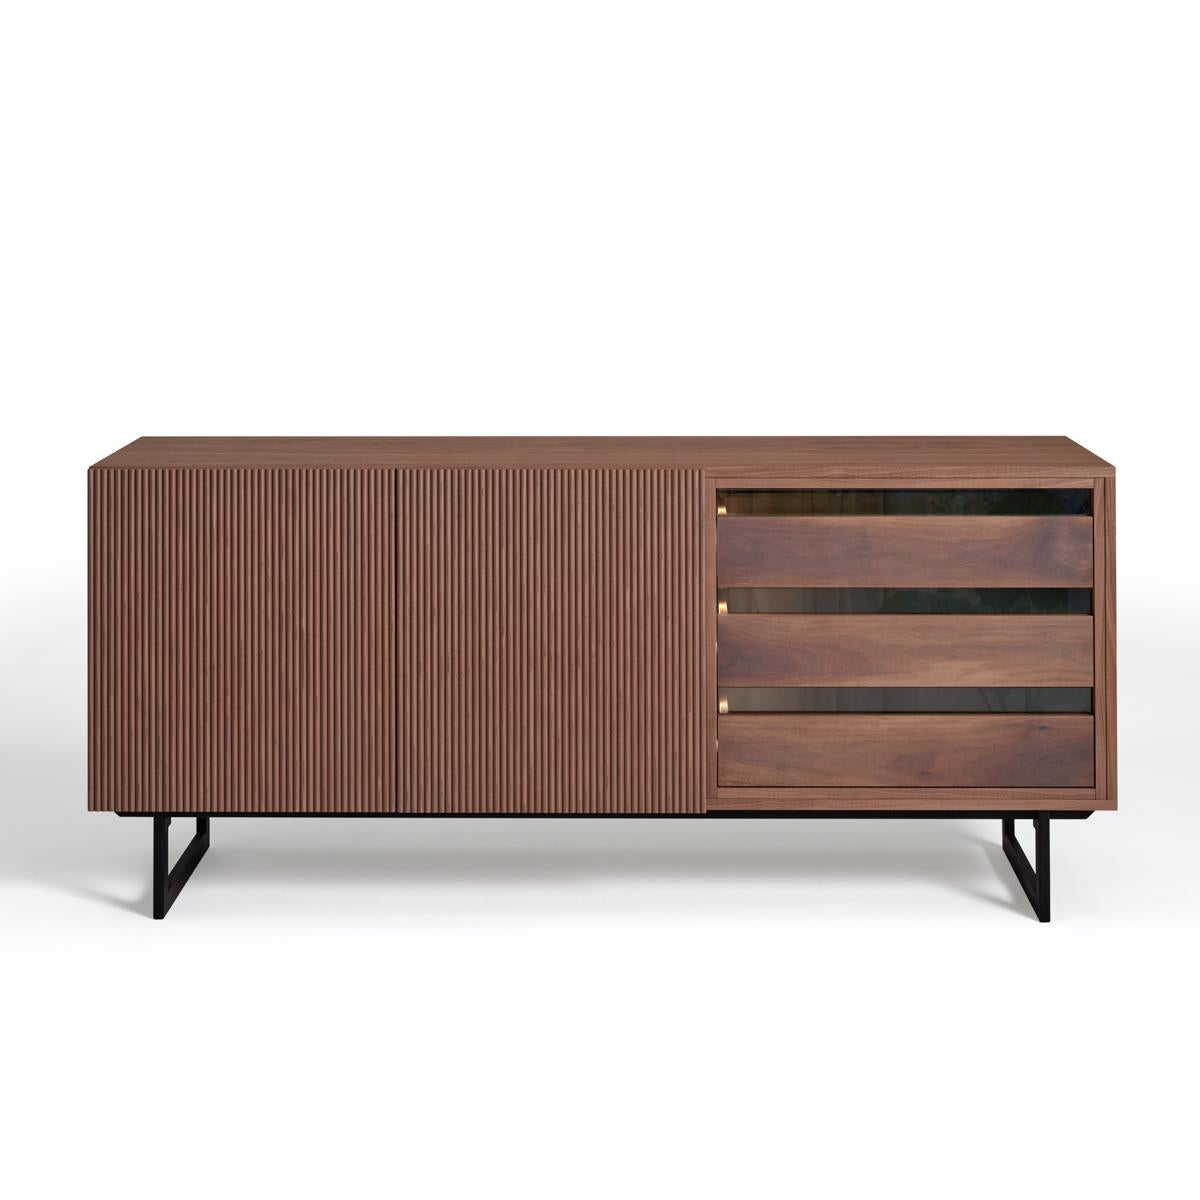 French 2- door 3-drawer sideboard in walnut & black iron feet, design by C. Lecomte For Sale